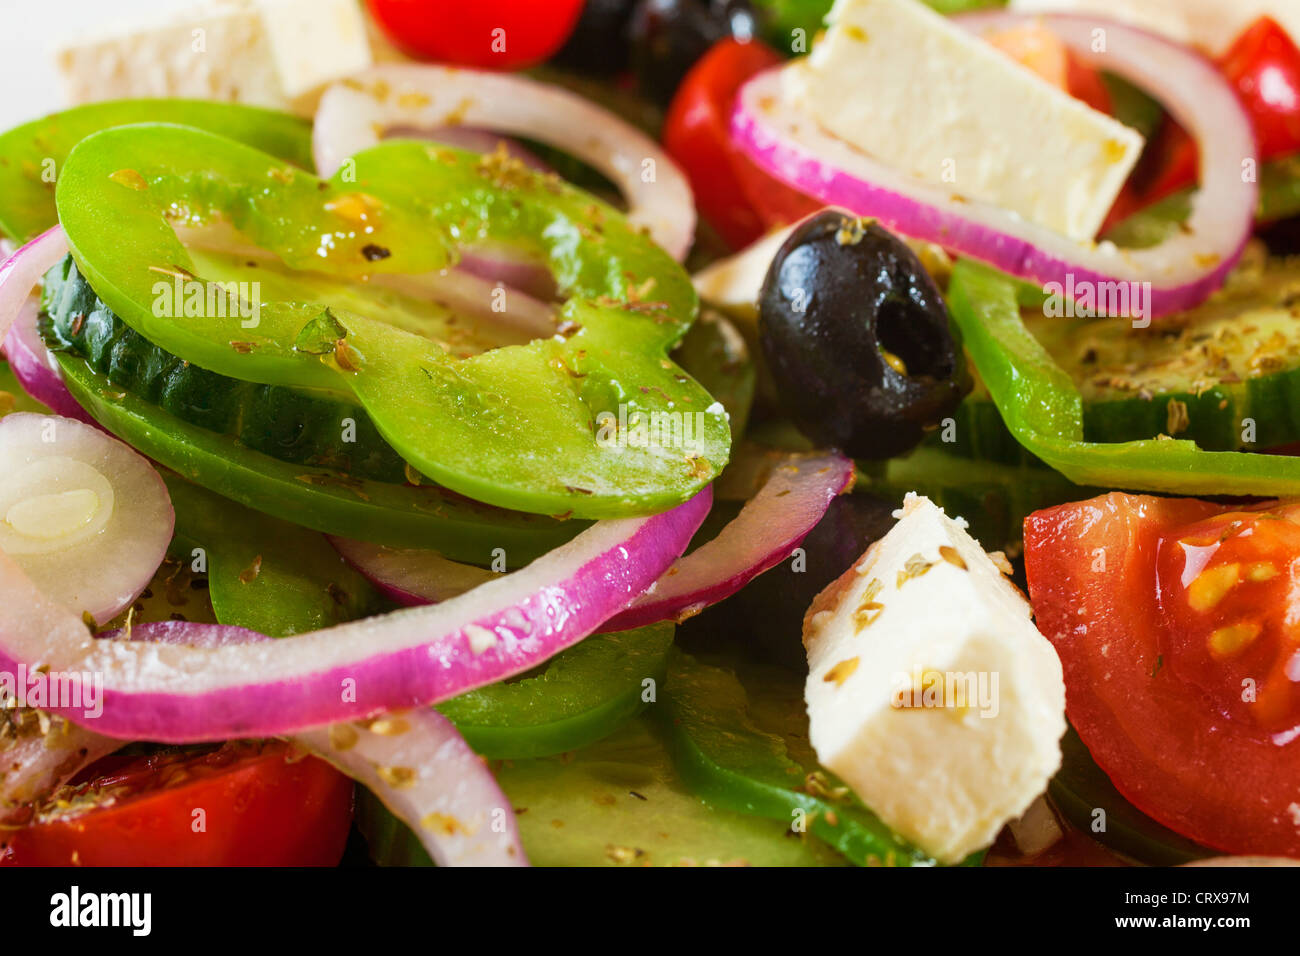 Greek salad, with tomatoes, red onions, green capsicums, cucumber, black olives, feta cheese and herbs. Stock Photo